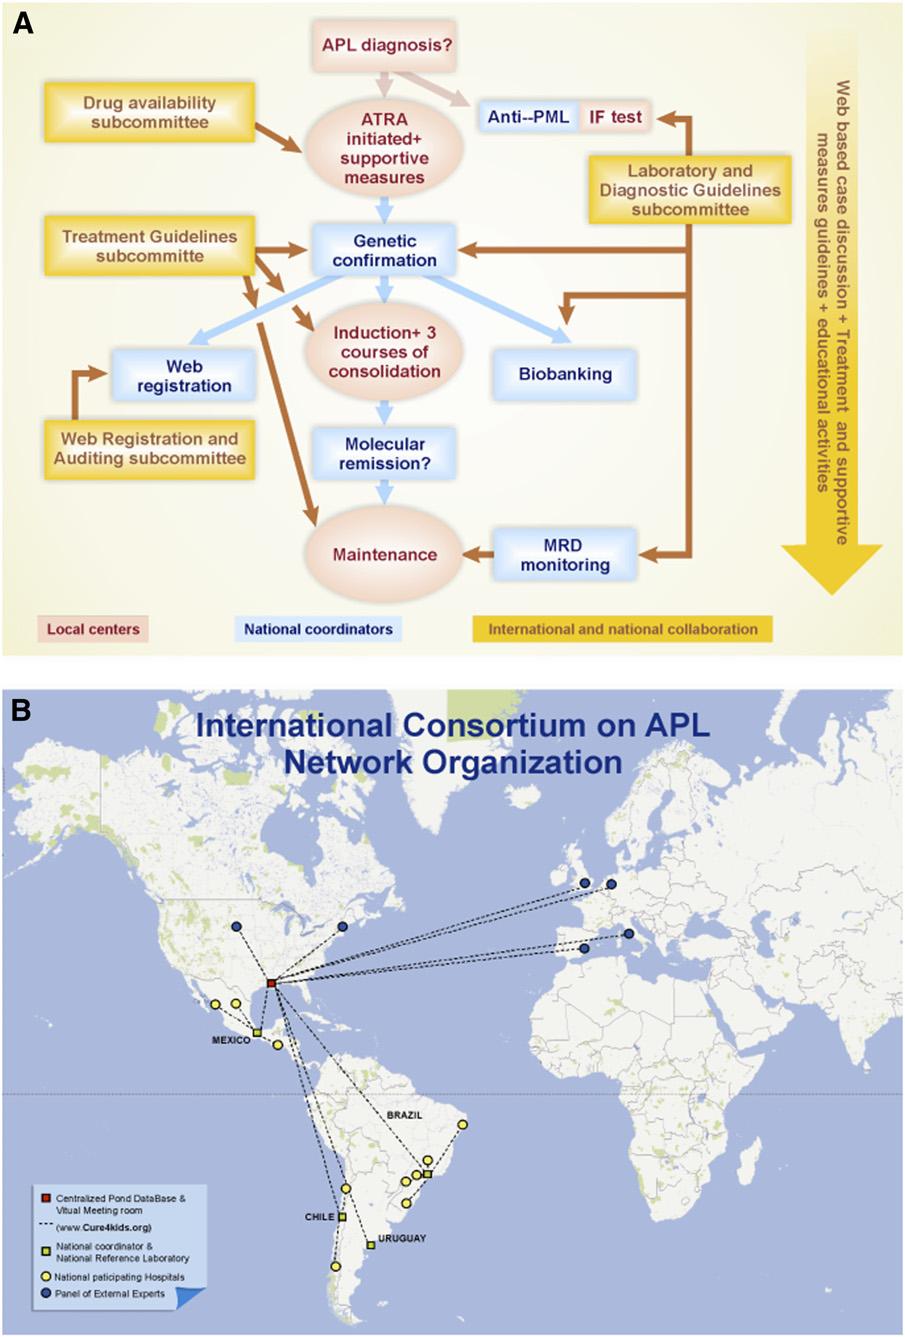 BLOOD, 14 MARCH 2013 x VOLUME 121, NUMBER 11 IMPROVING APL OUTCOME IN DEVELOPING COUNTRIES 1937 Figure 1. Organization of the IC-APL network for the diagnosis and treatment of a given case of APL.